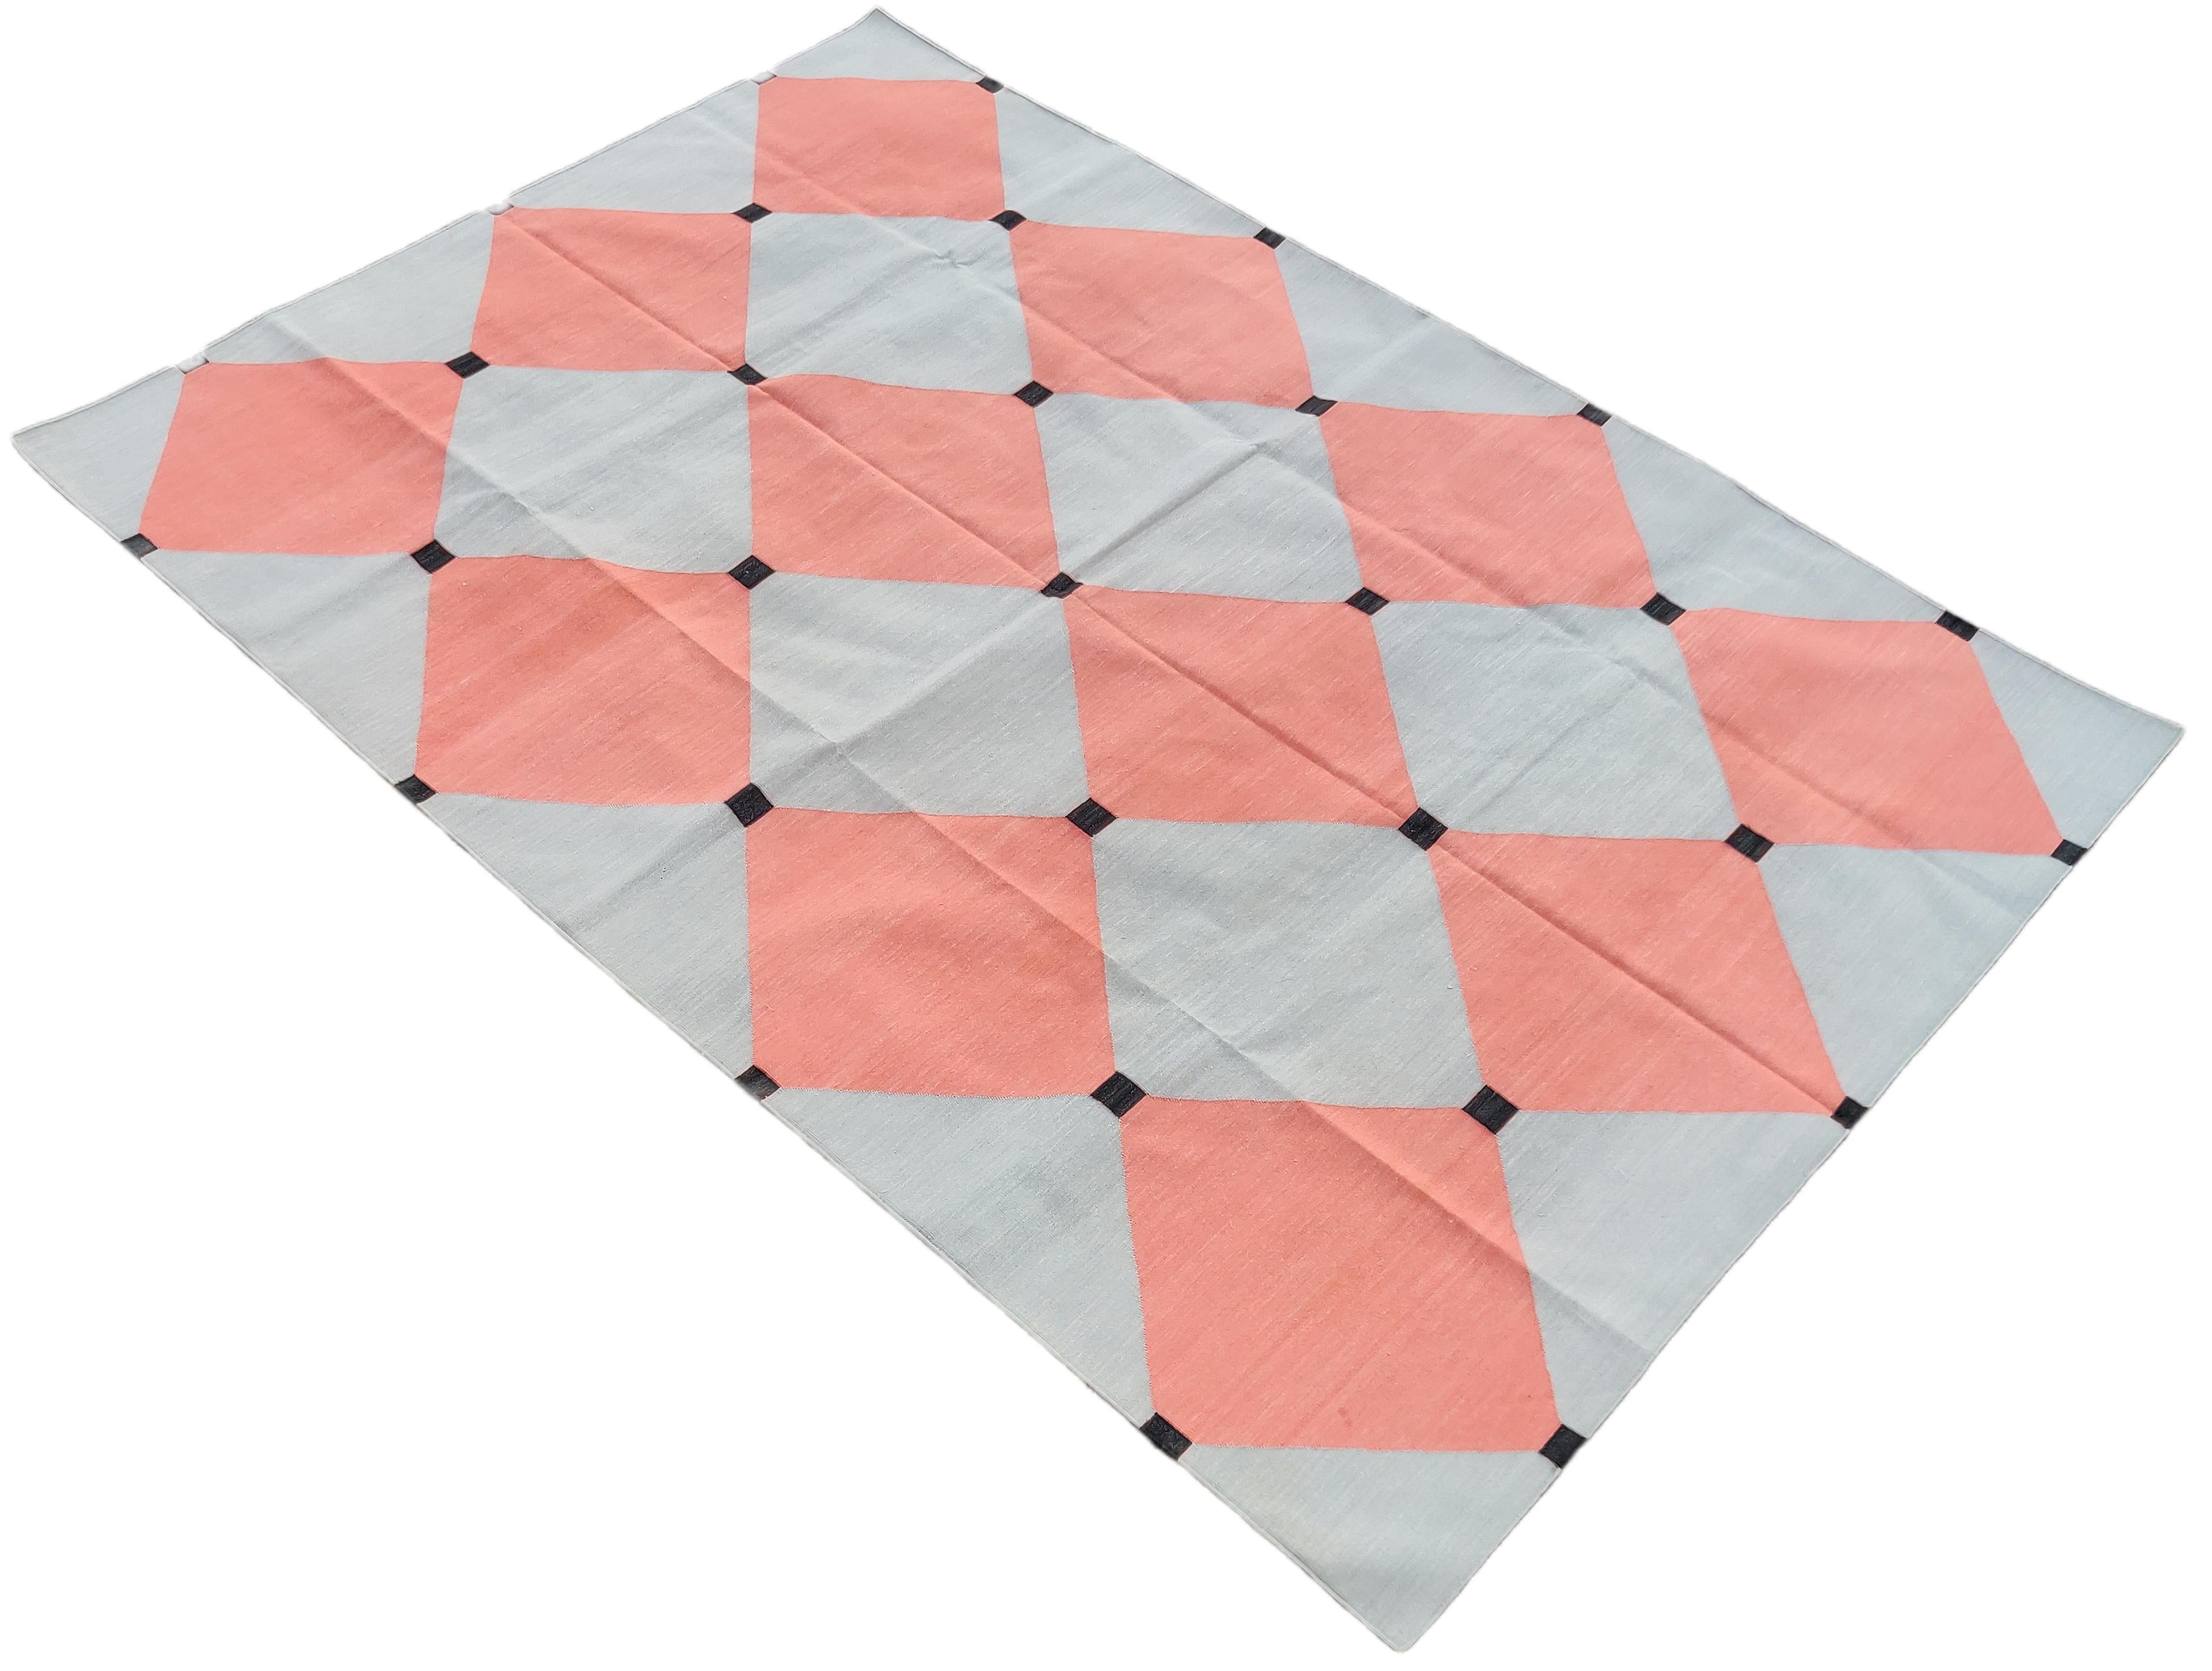 Cotton Vegetable Dyed Reversible Grey And Coral Indian Tile Checked Rug - 6'x9'
These special flat-weave dhurries are hand-woven with 15 ply 100% cotton yarn. Due to the special manufacturing techniques used to create our rugs, the size and color of